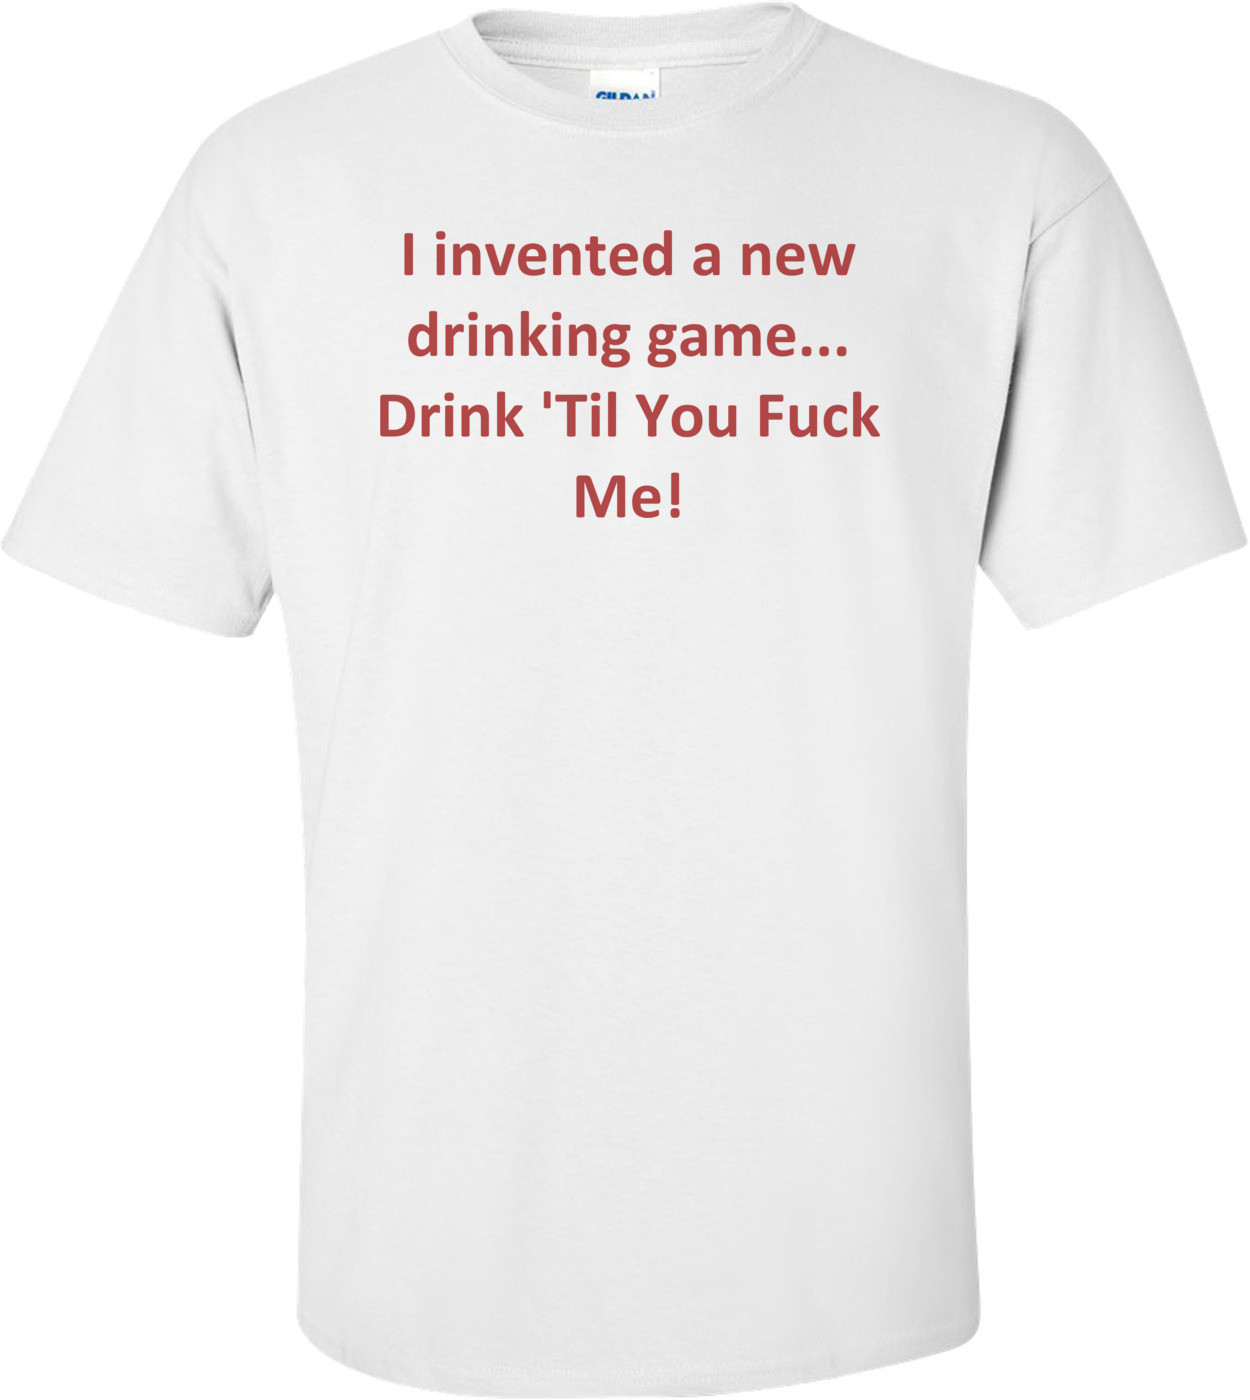 I invented a new drinking game... Drink 'Til You Fuck Me!